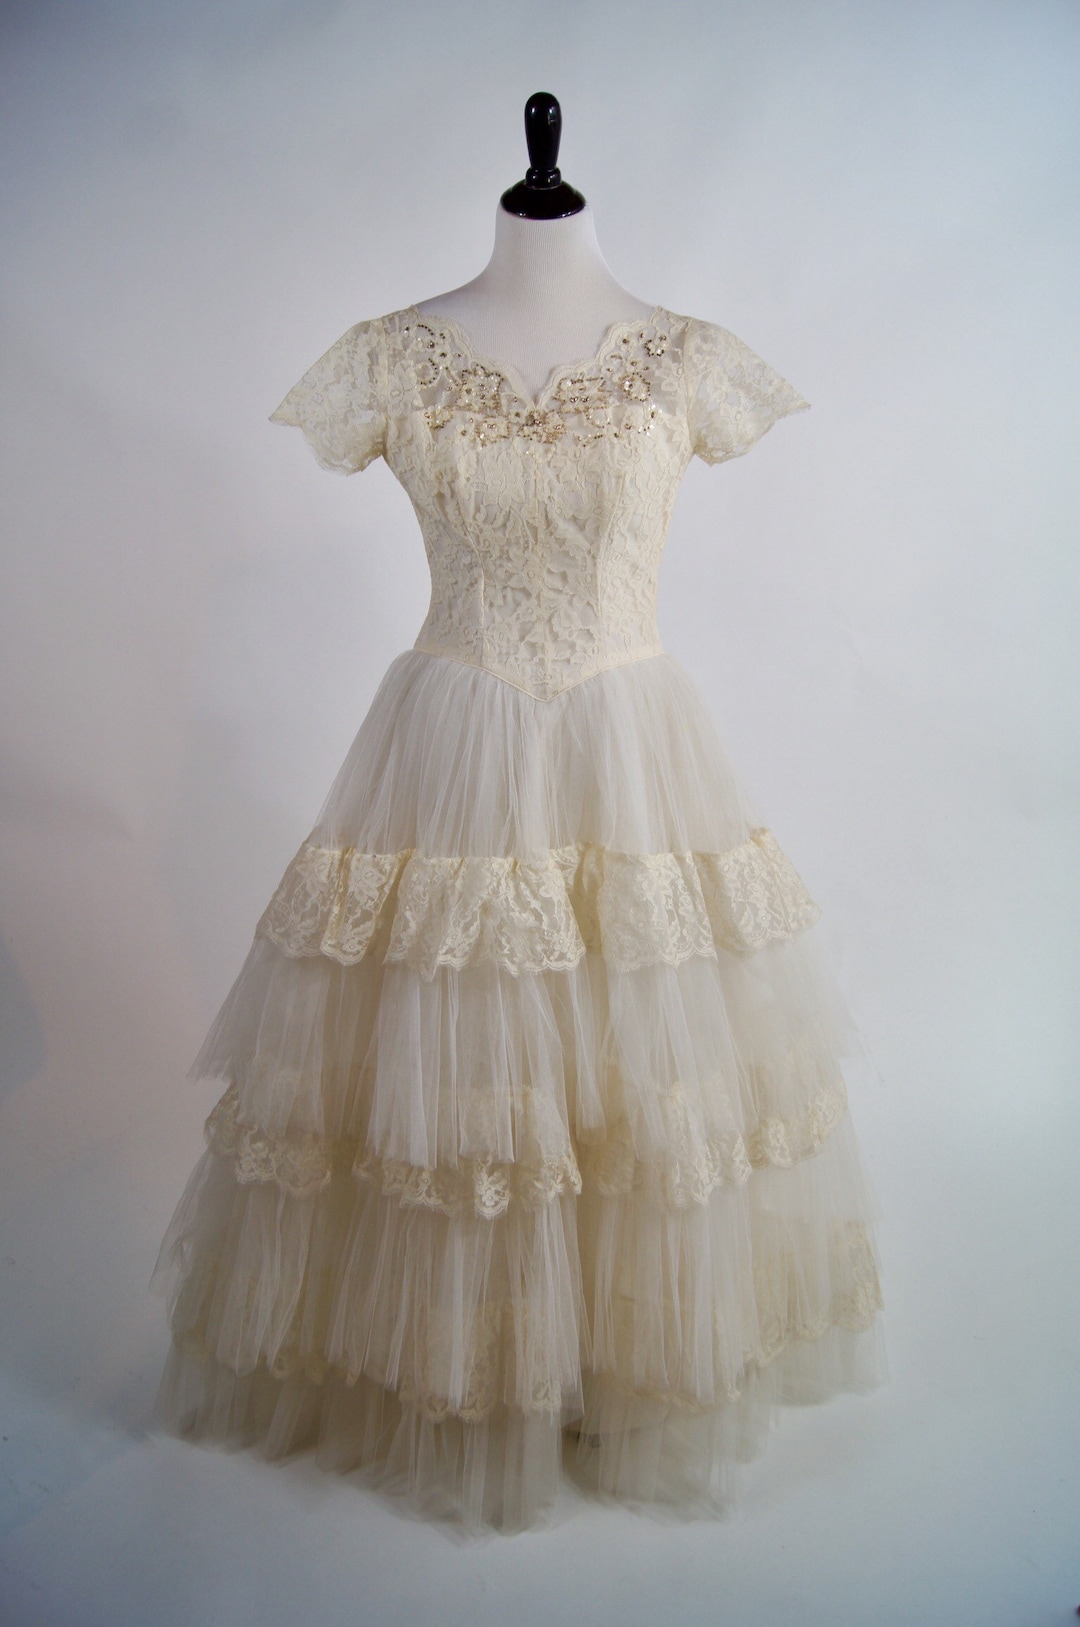 Dreamy Vintage 1950s Tulle Beaded Lace Wedding Dress, Ivory, XS - Etsy